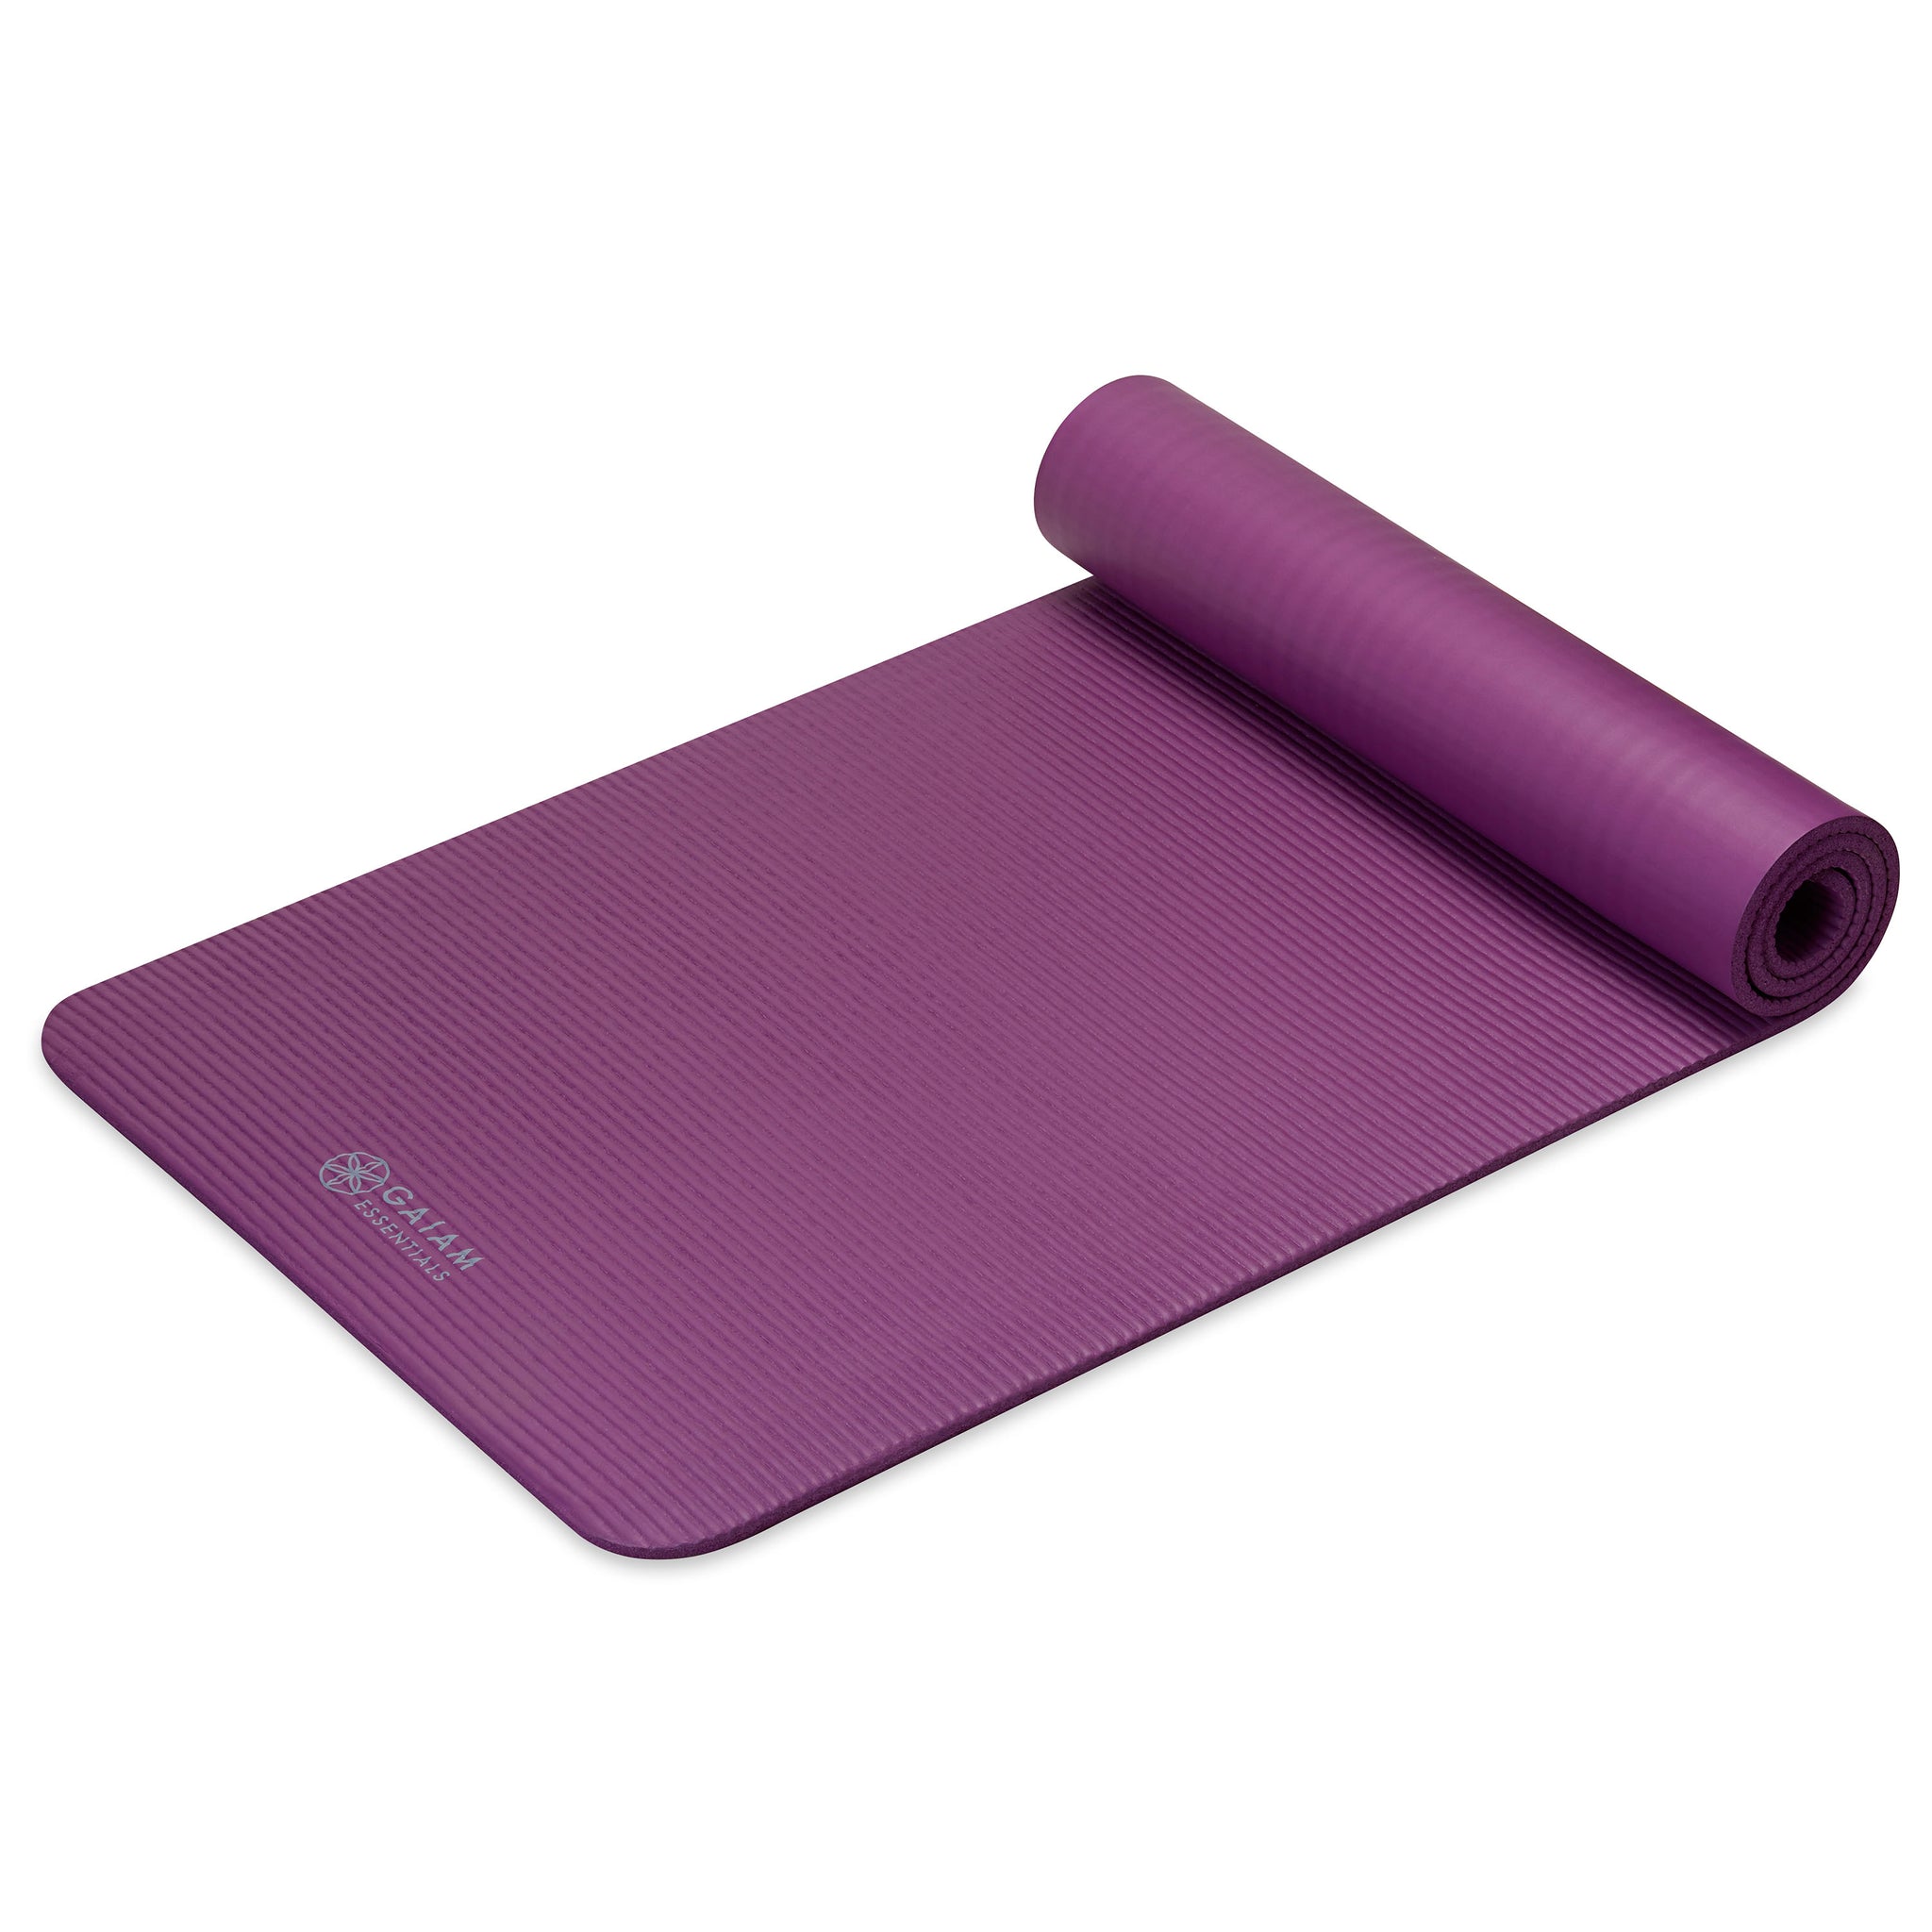 Gaiam Essentials Premium Yoga Mat with Yoga Mat Carrier Sling, Navy, 72L x  24W x 1/4 Inch Thick